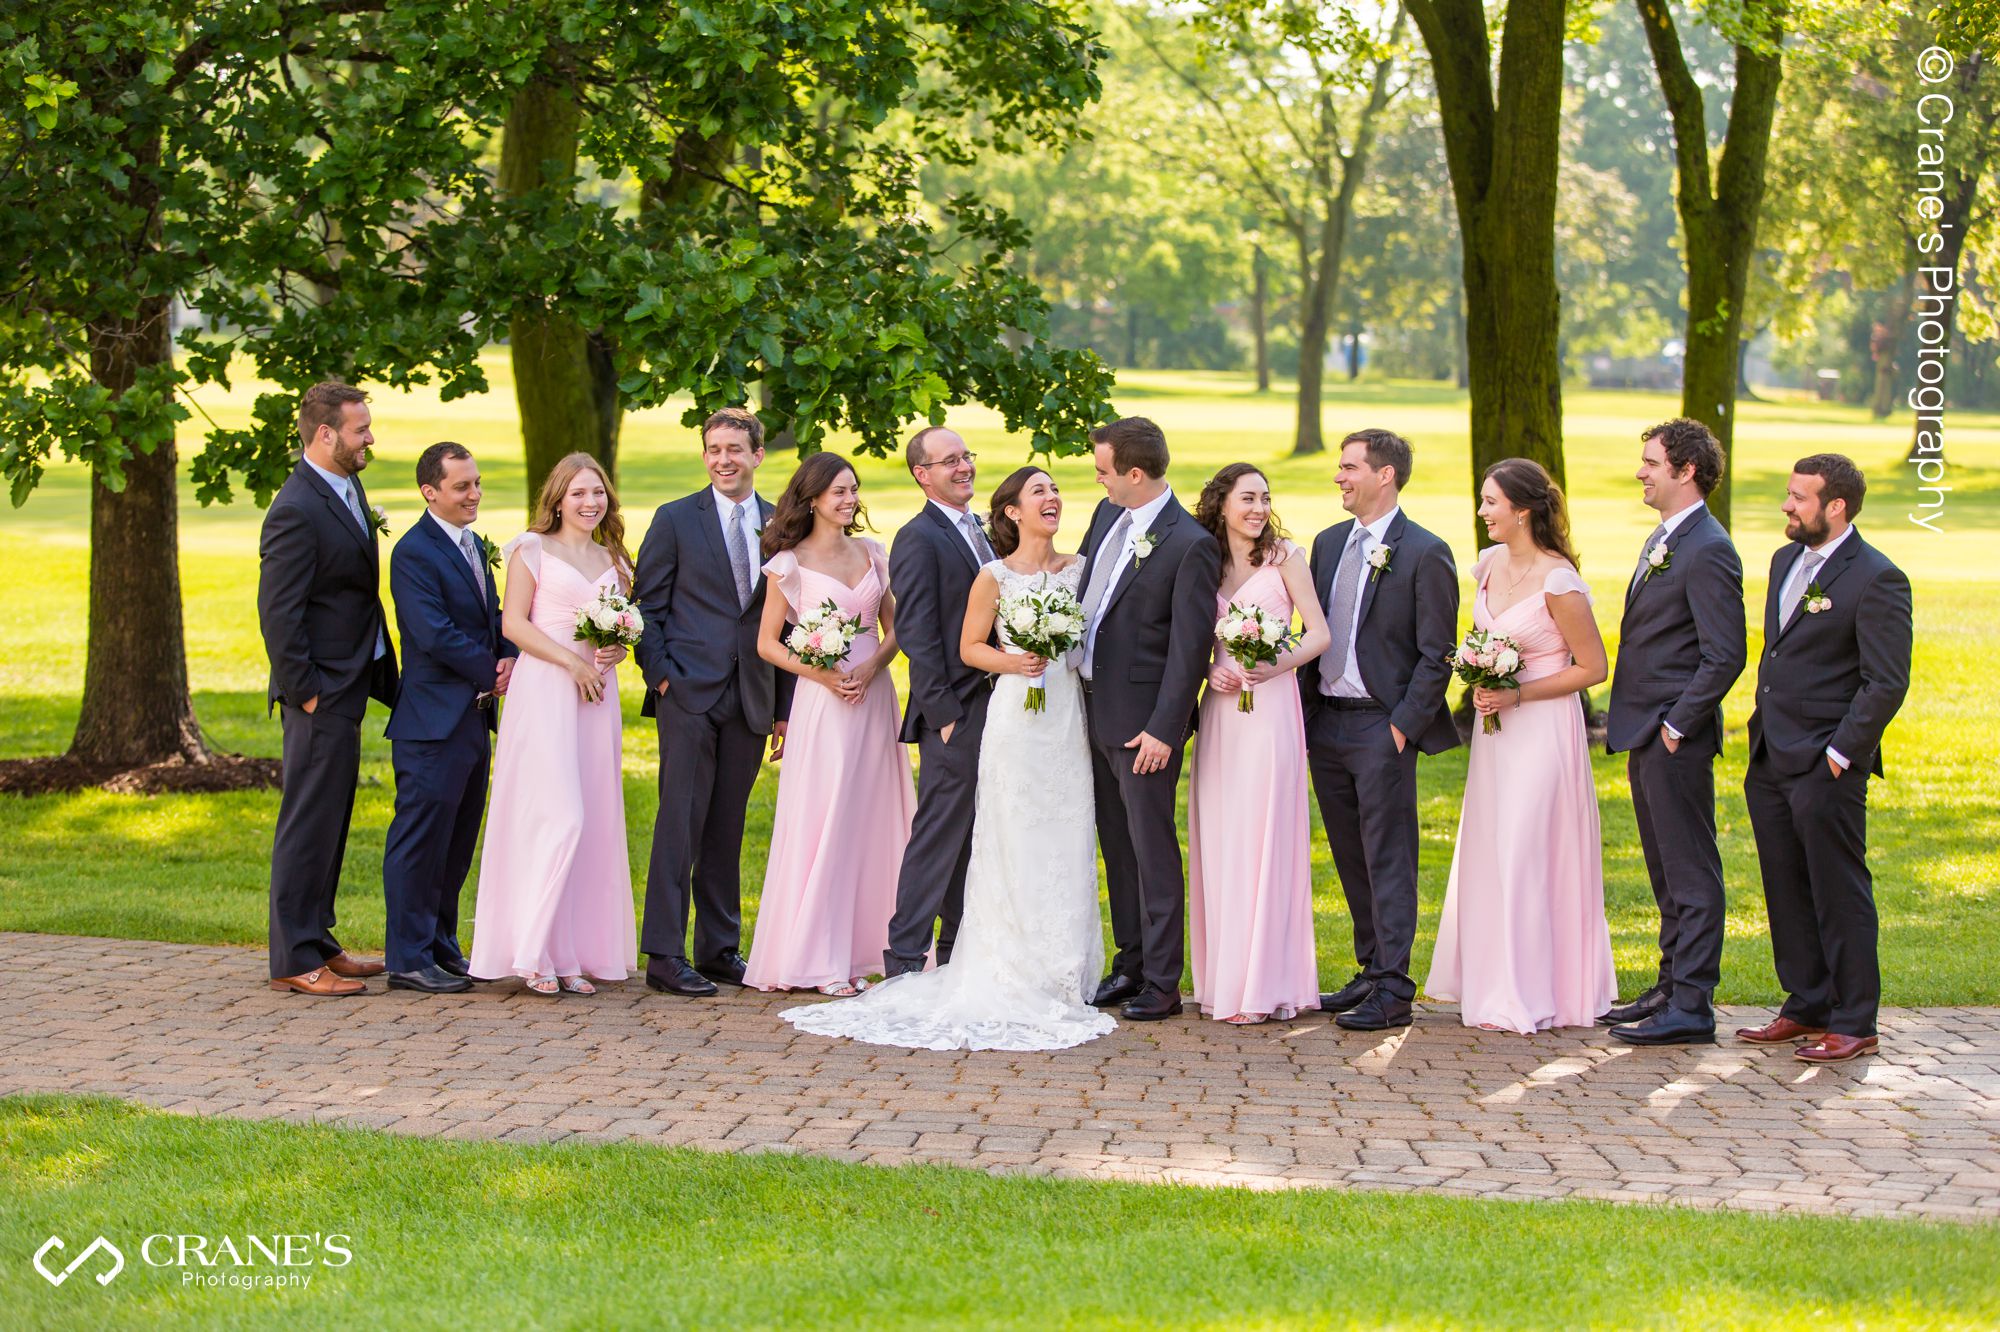 Wedding party photo at La Grange Country Club with the golf course in the background